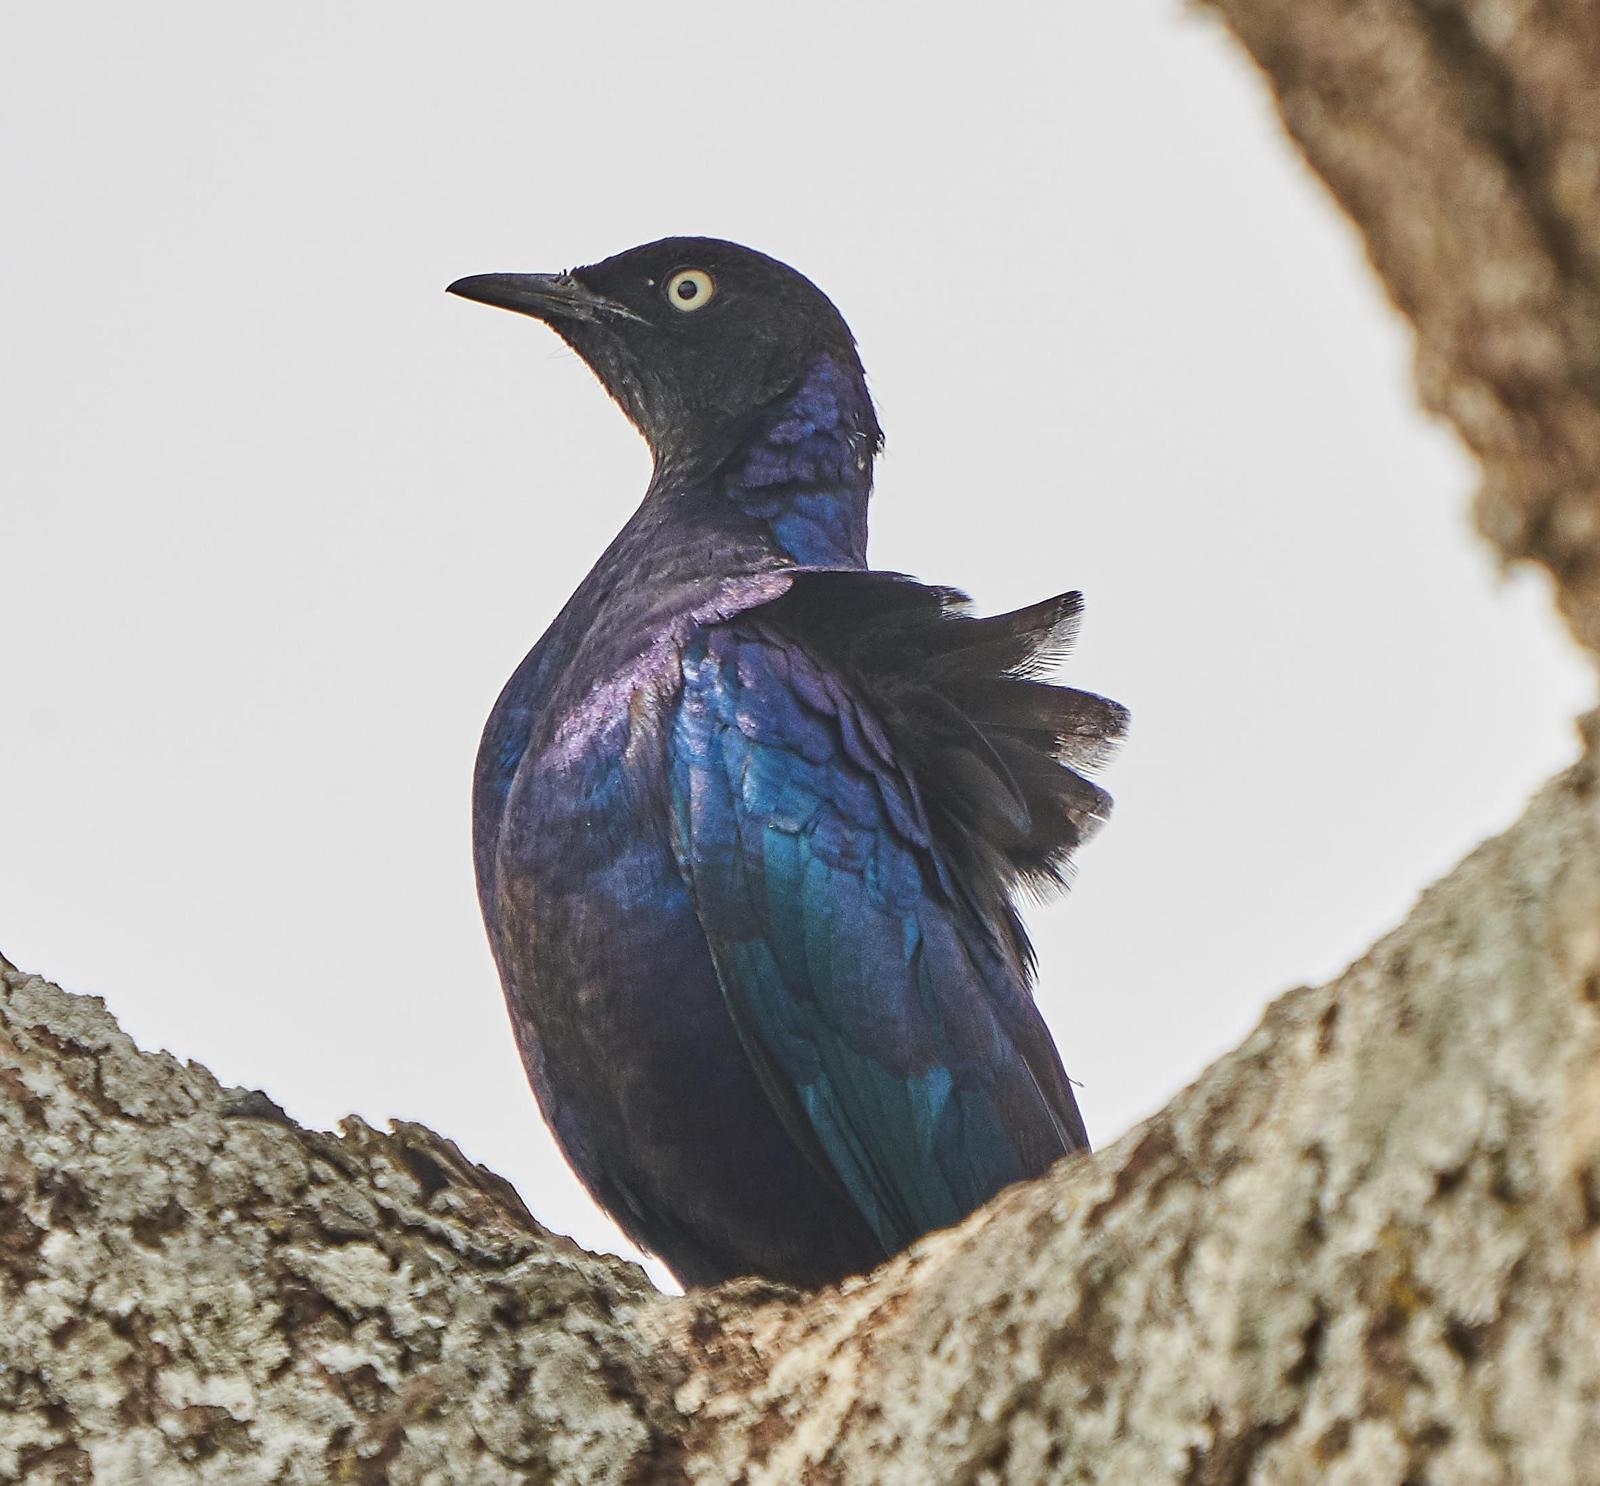 Black-bellied Starling Photo by Steven Cheong